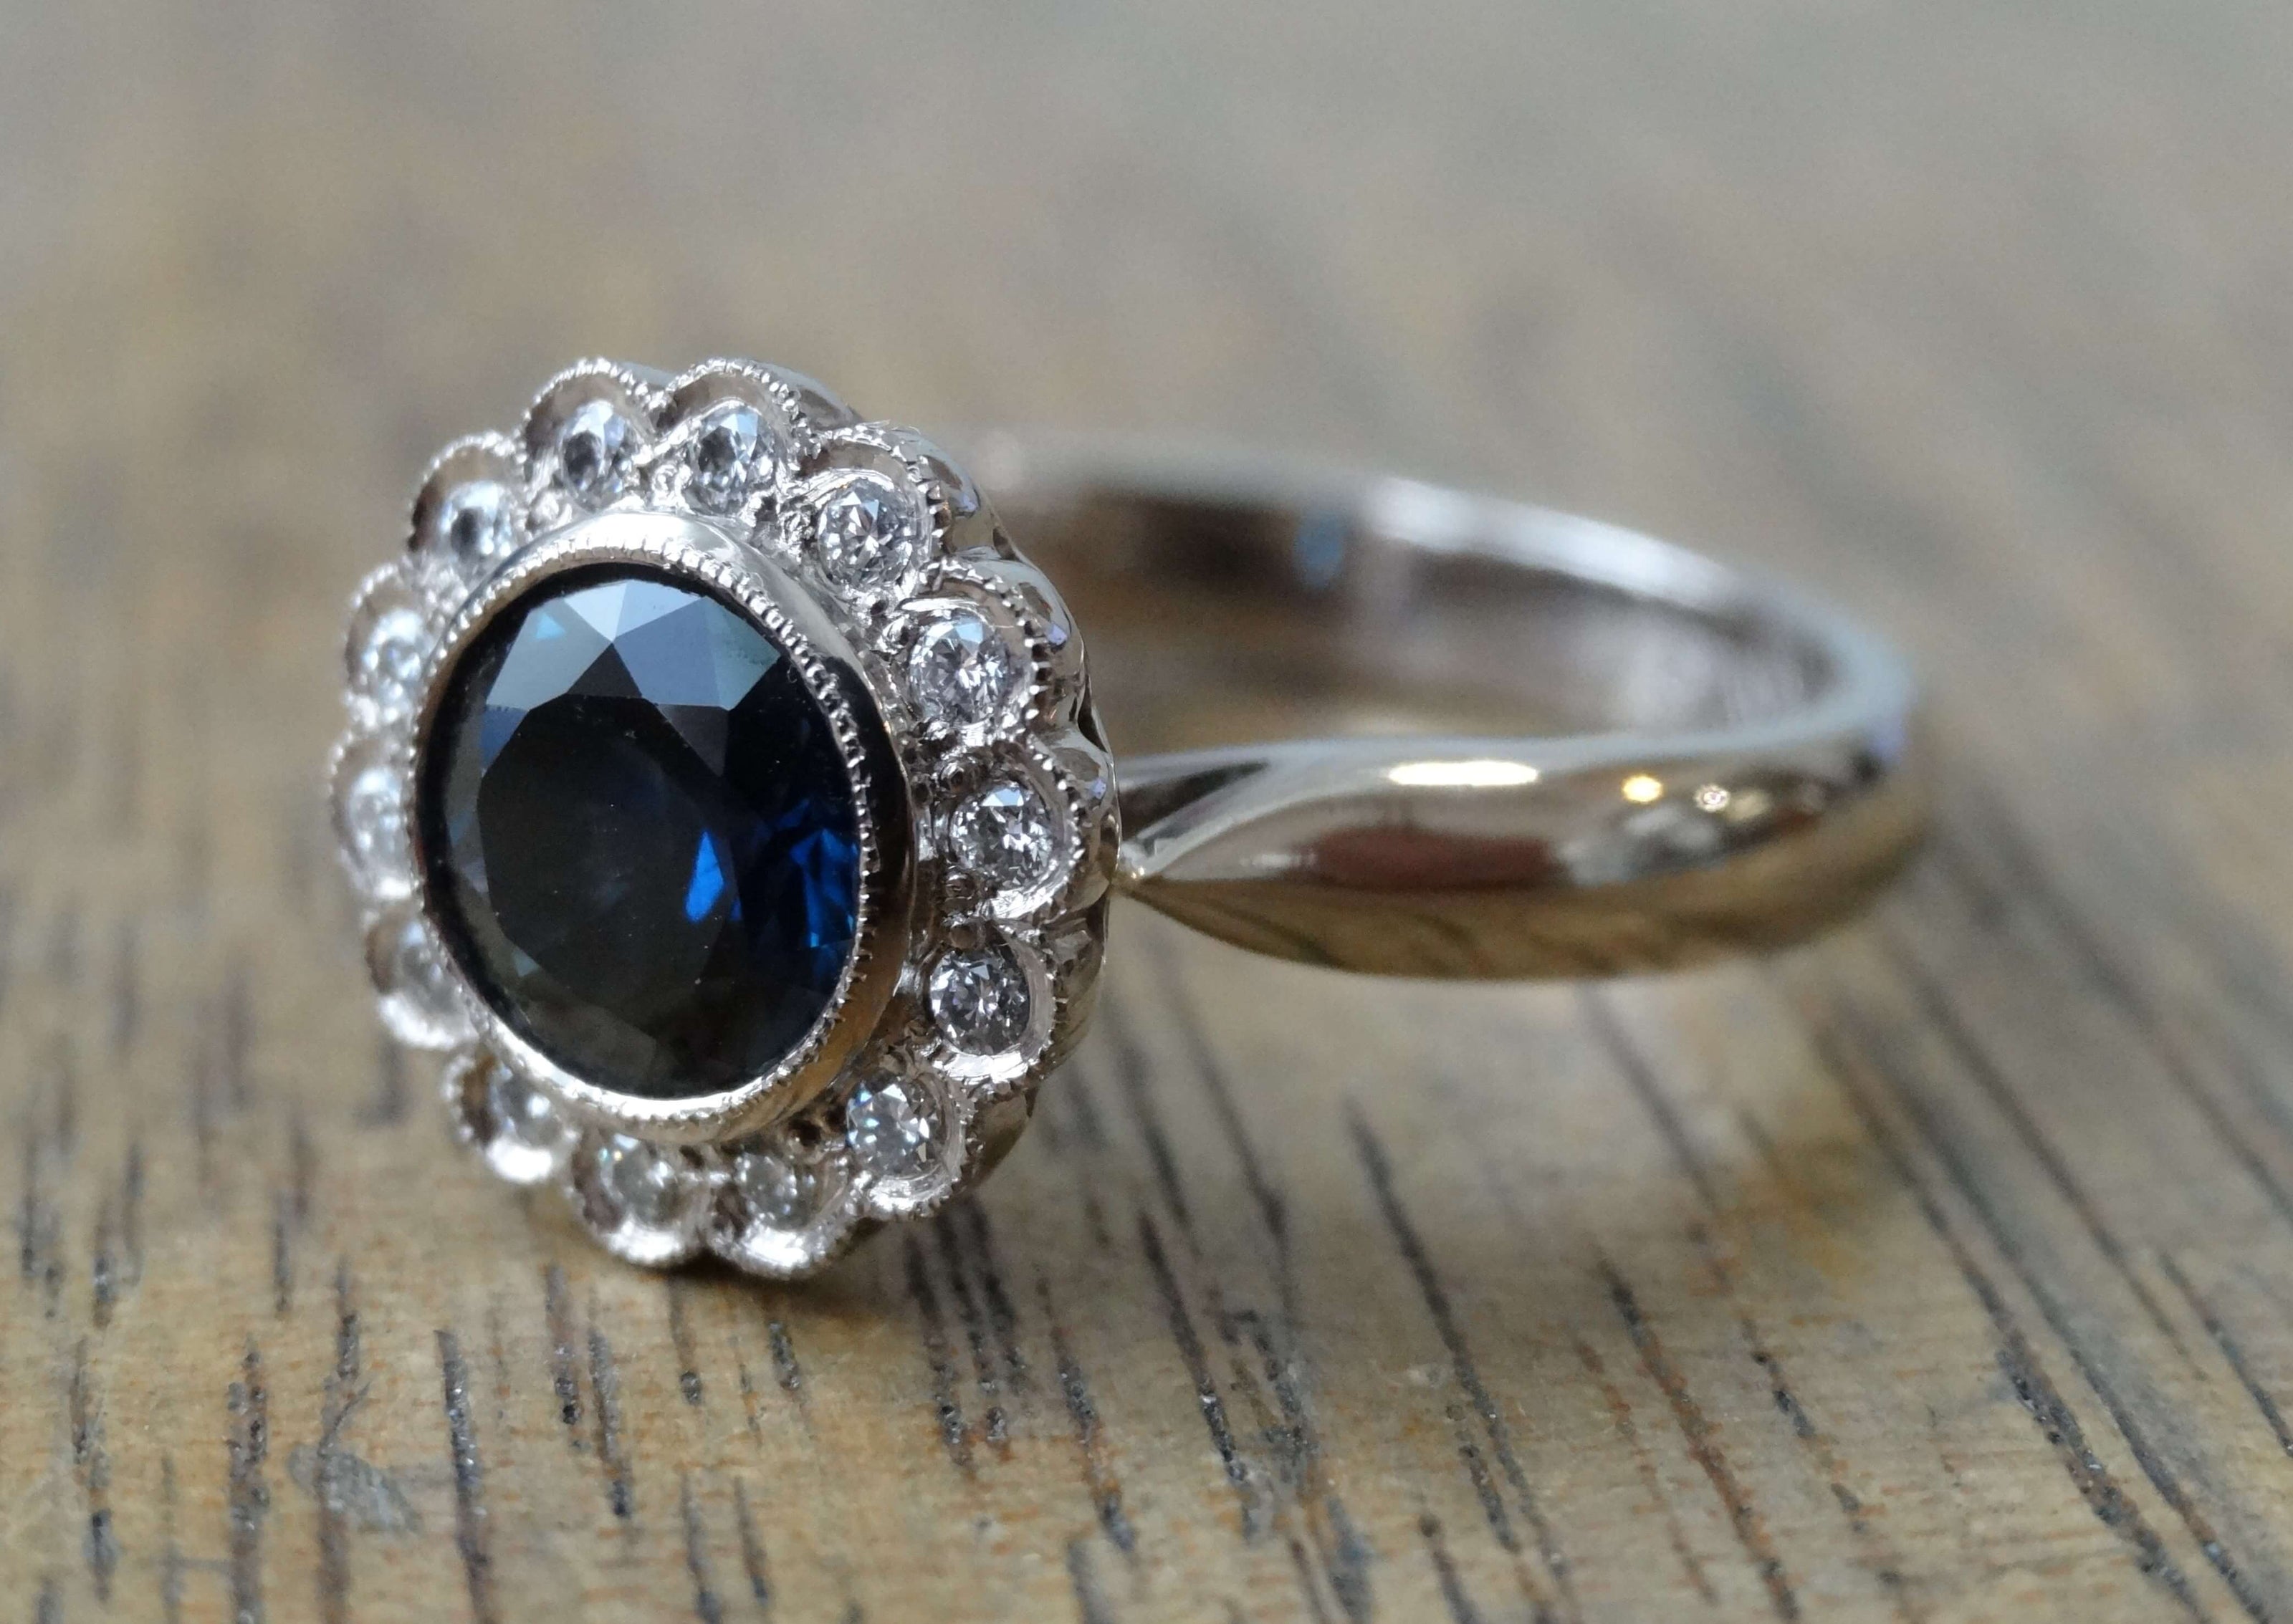 Platinum engagement ring set with a round blue sapphire and a halo of diamonds with mill-grain.  Ring is lying on a wooden surface